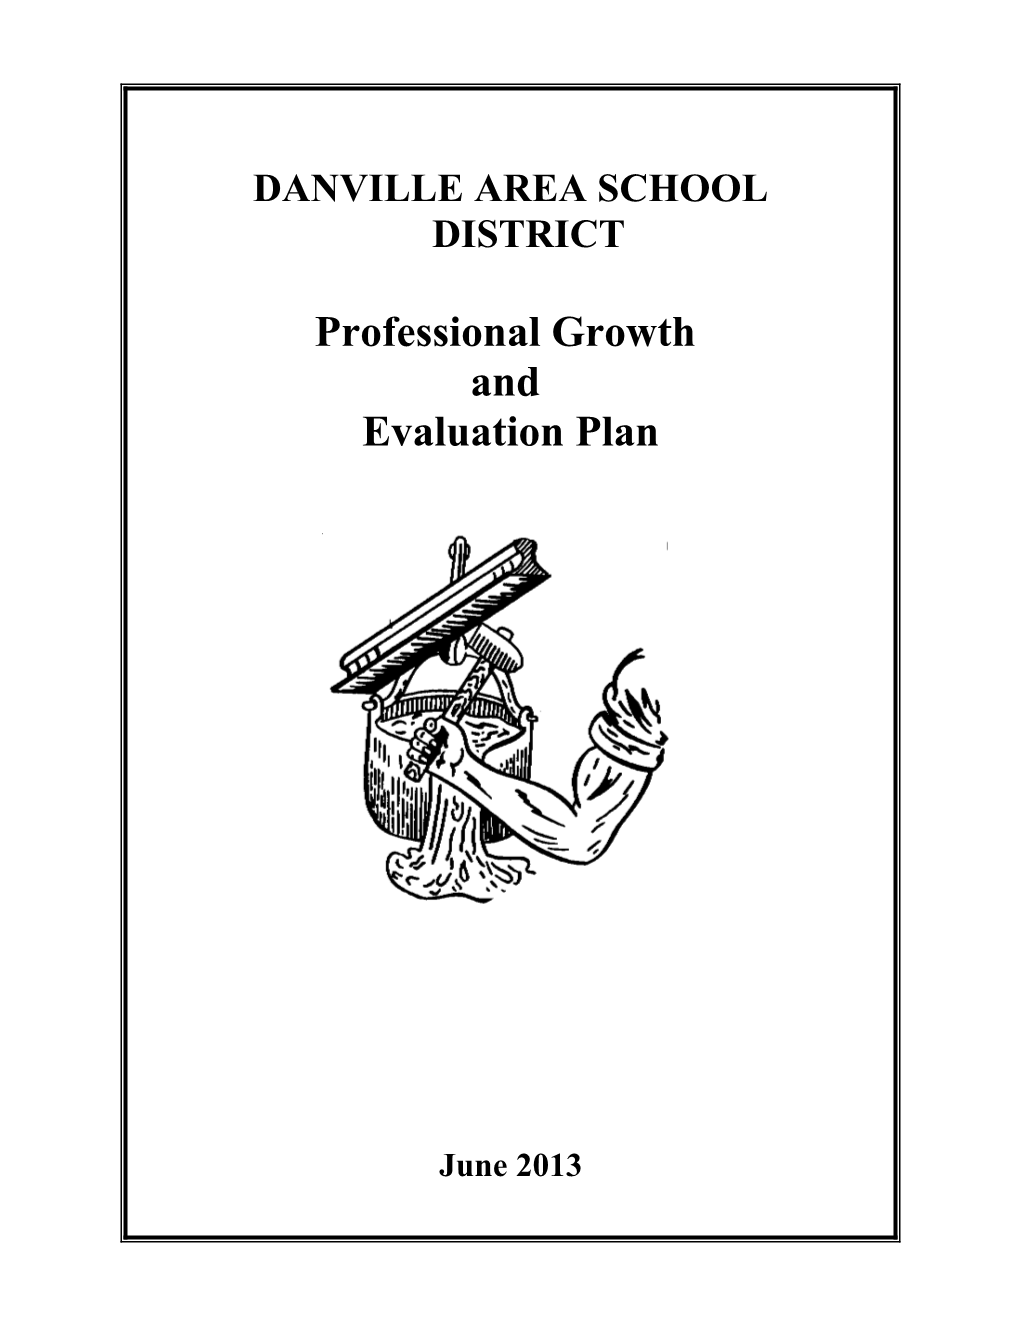 DASD Professional Growth and Evaluation Plan